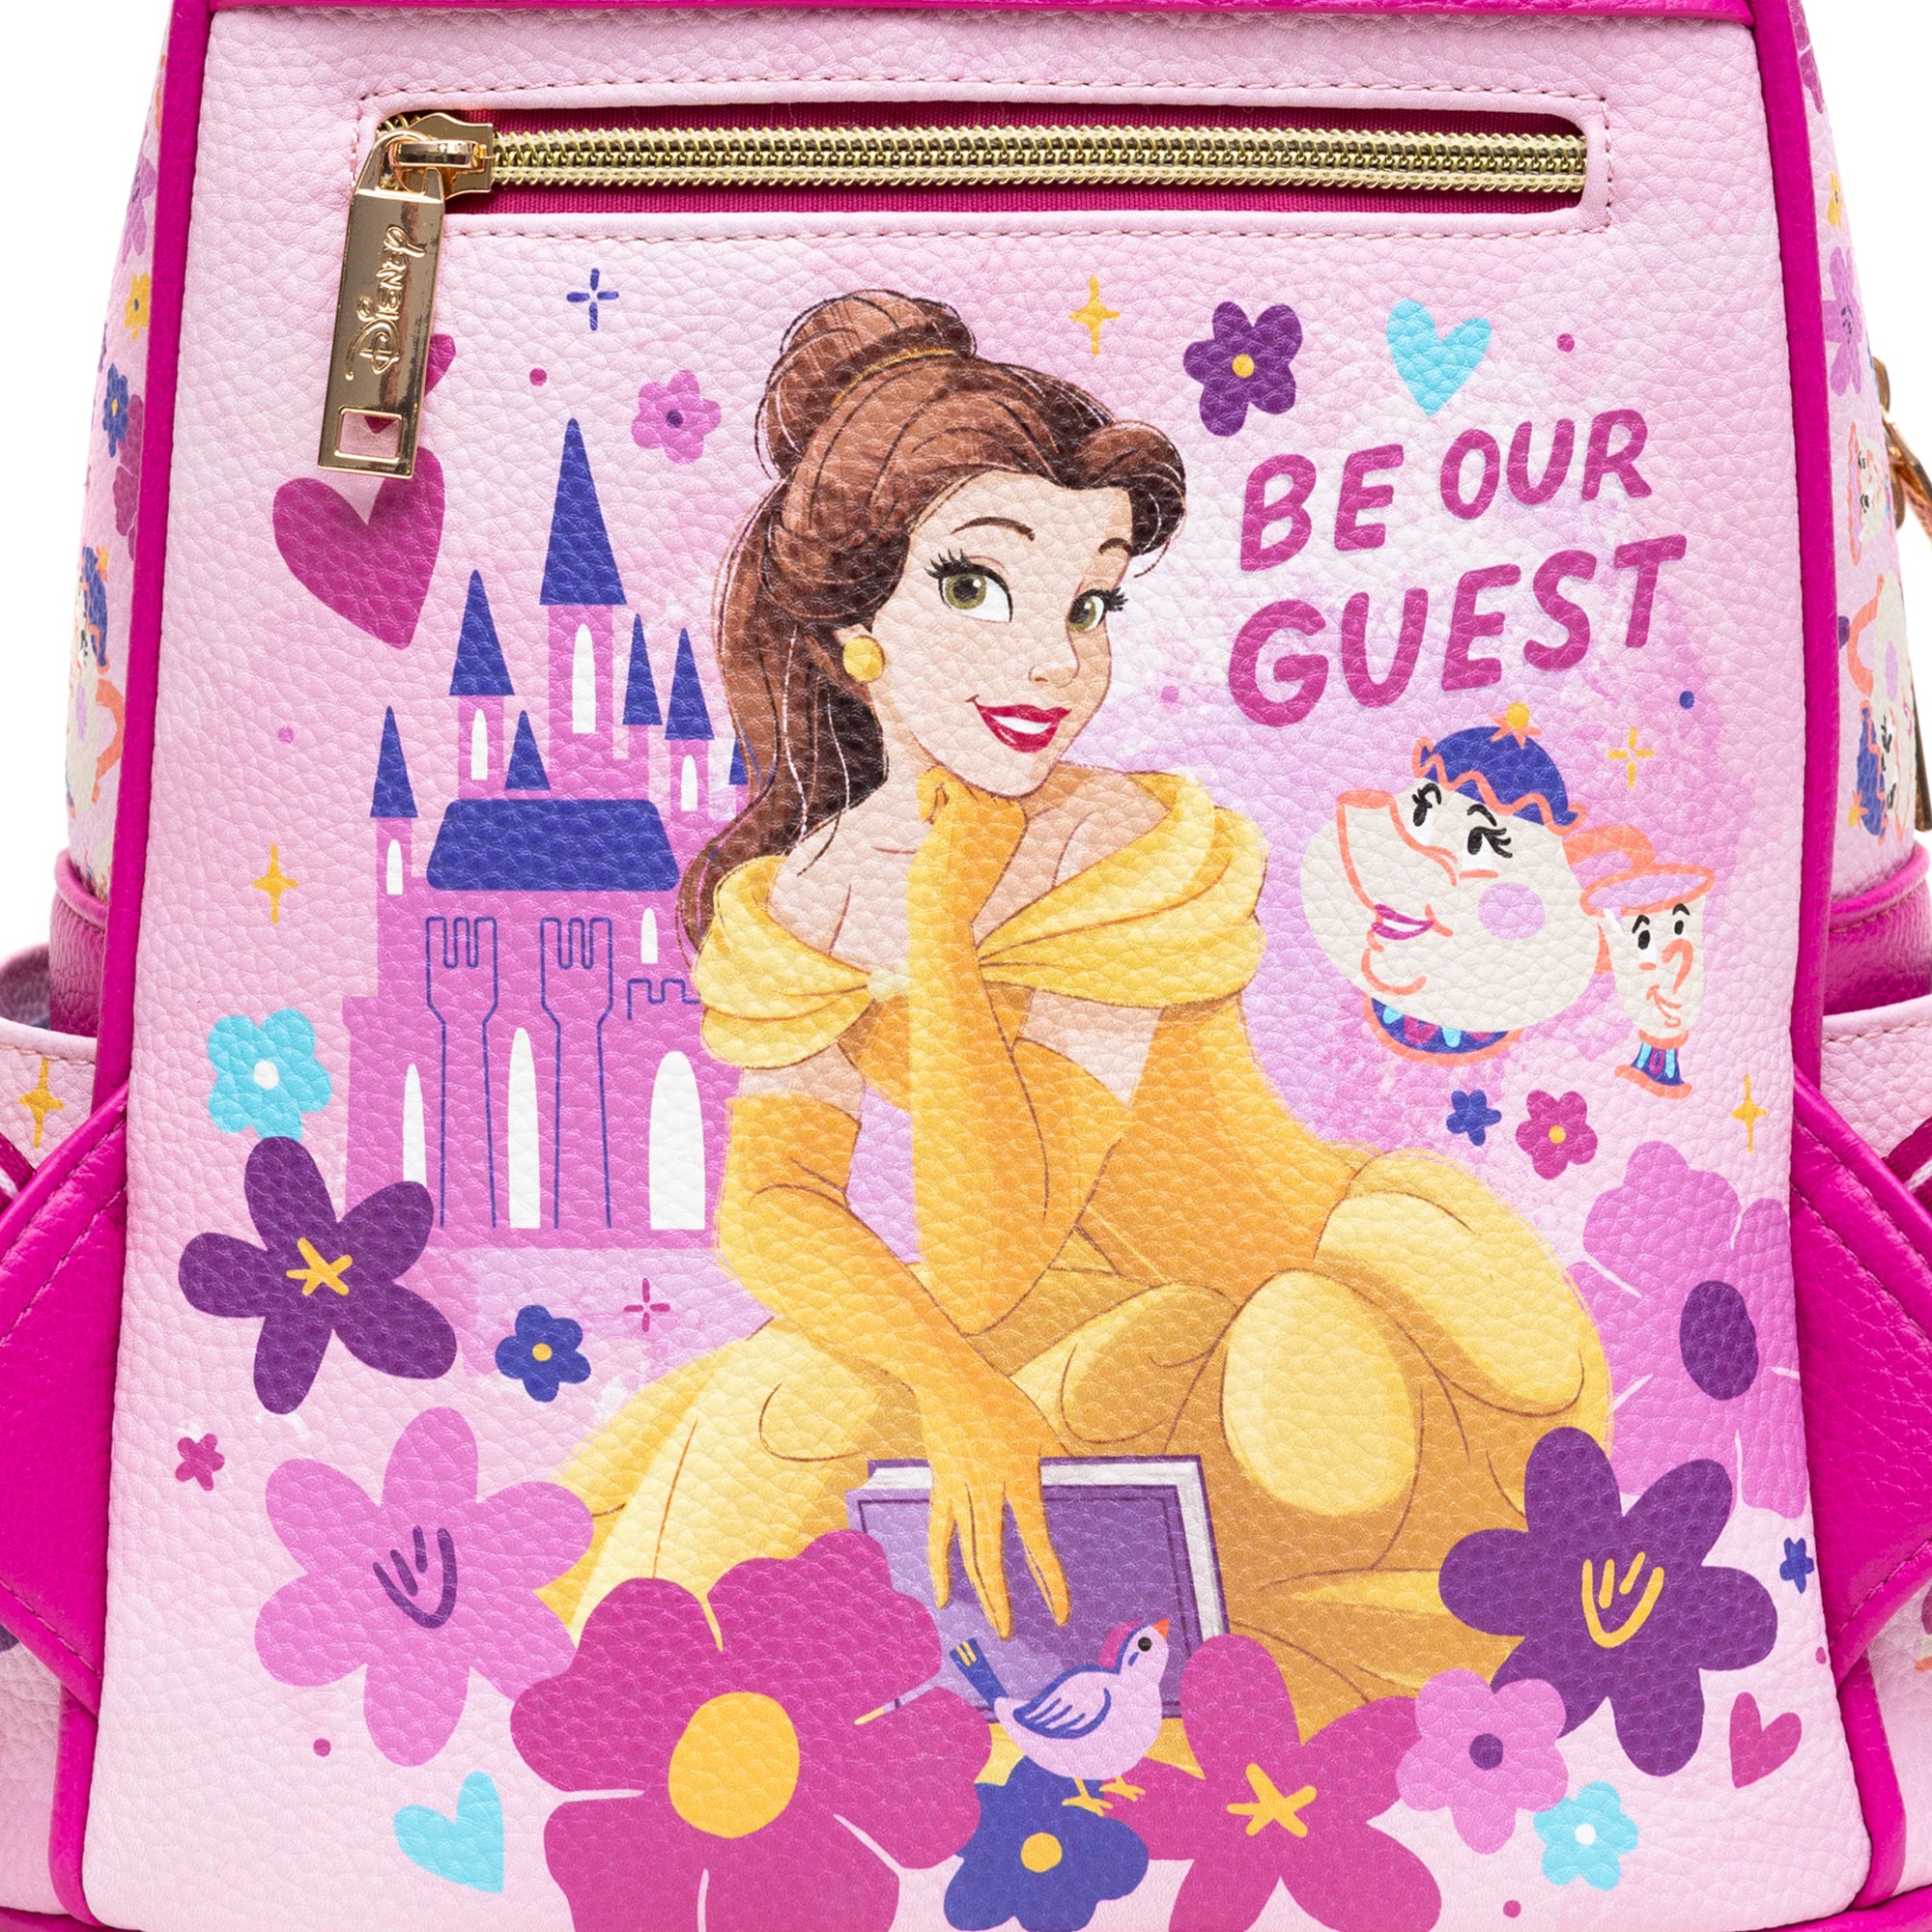 WondaPOP LUXE - Disney Princess Beauty and the Beast Mini Backpack - Limited Edition - NEW RELEASE